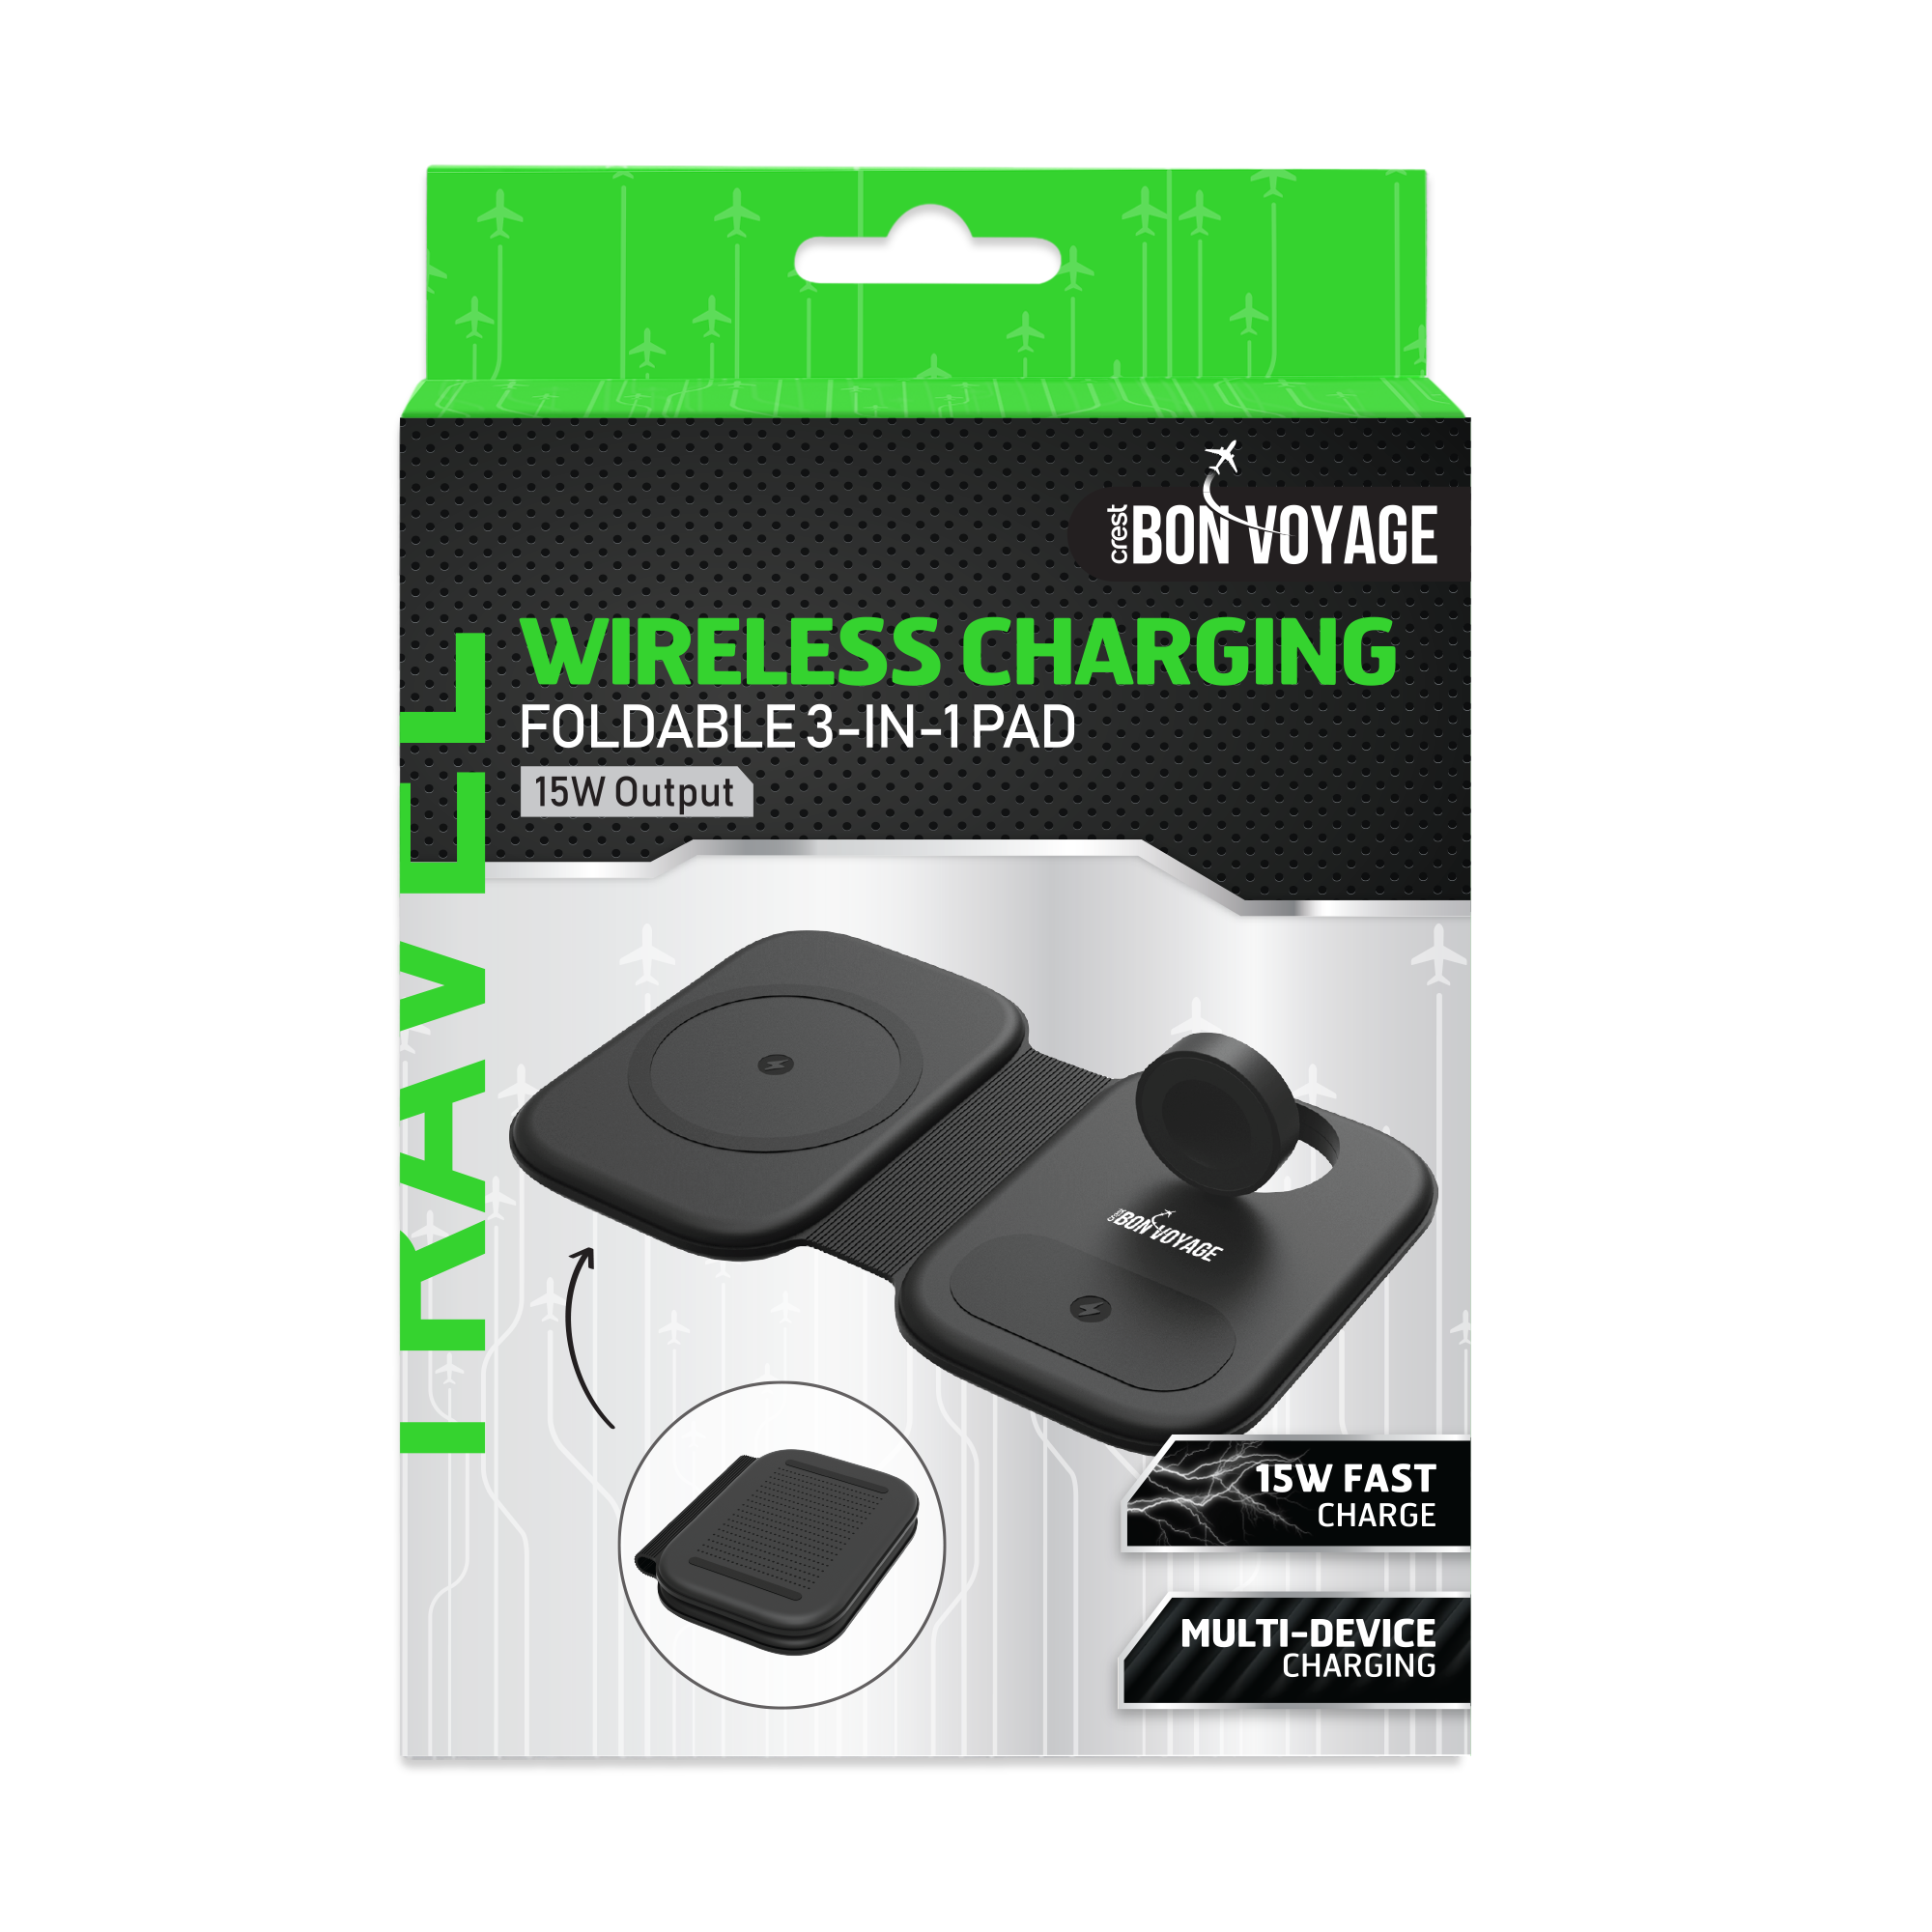 Bon Voyage WIRELESS CHARGING Foldable 3-in-1 Pad